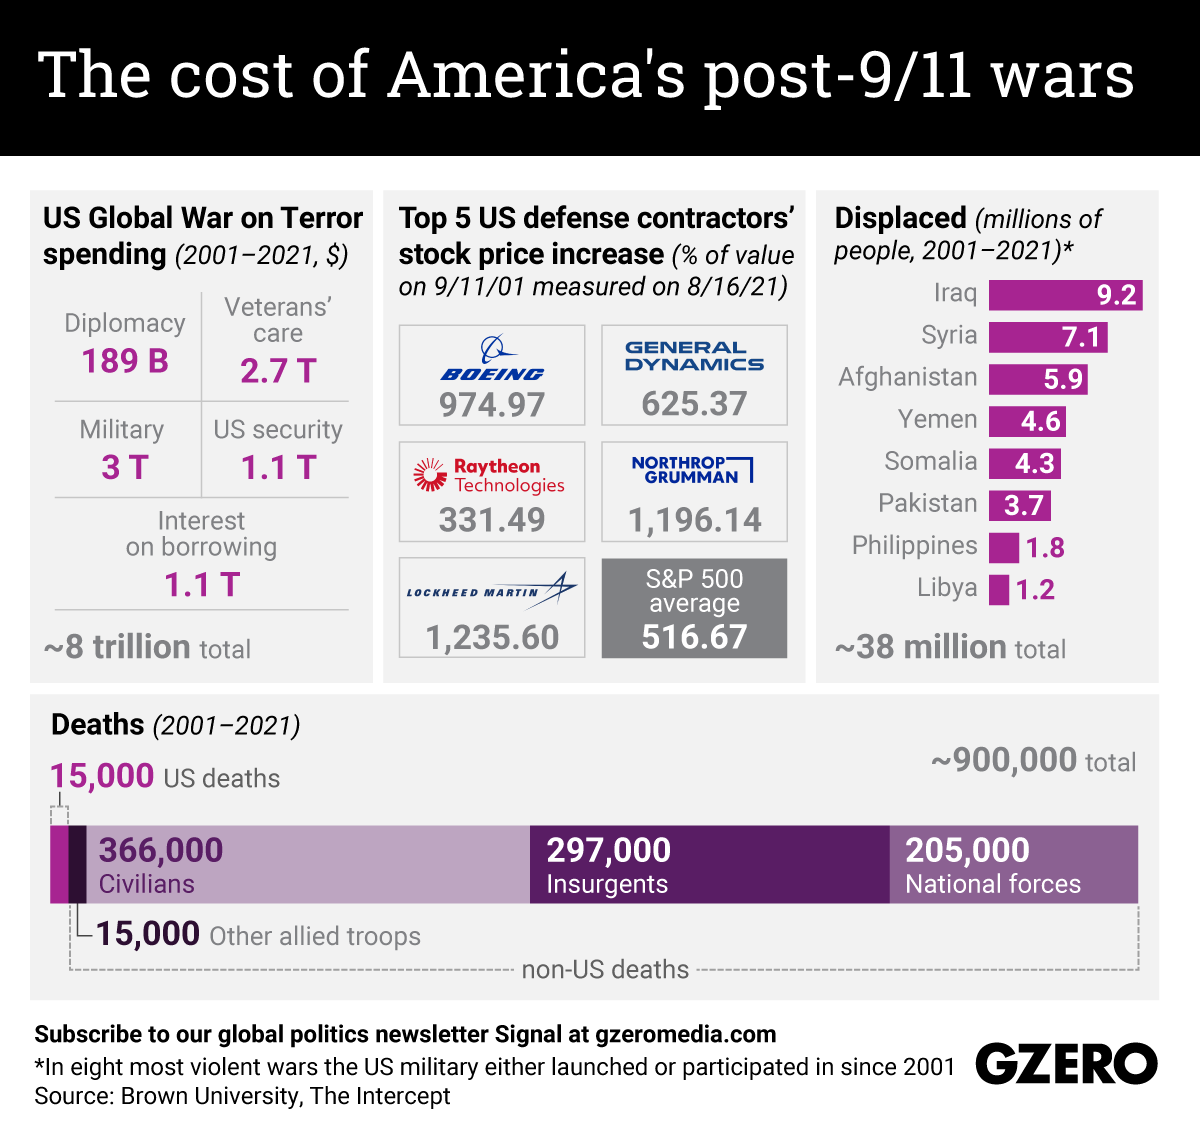 The Graphic Truth: The cost of America's post-9/11 wars